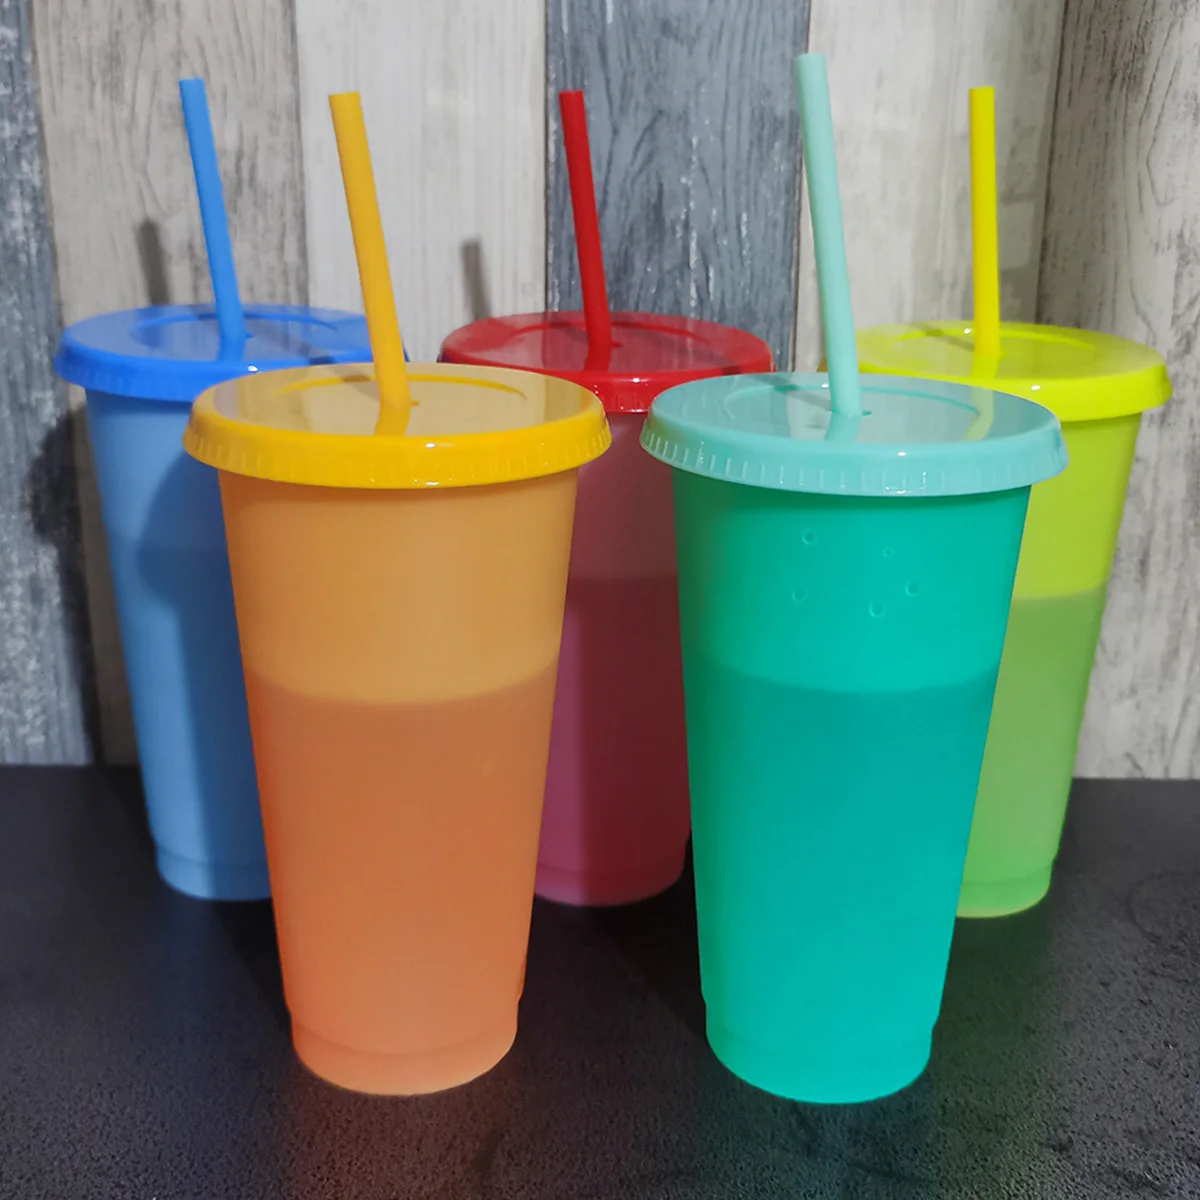 https://ae01.alicdn.com/kf/Sa1c389c894ce422c8a261298b0b25c6ep/5-Pcs-Color-Changing-Cups-Set-24oz-Reusable-Plastic-Cold-Drink-Cups-with-Lids-and-Straws.jpg